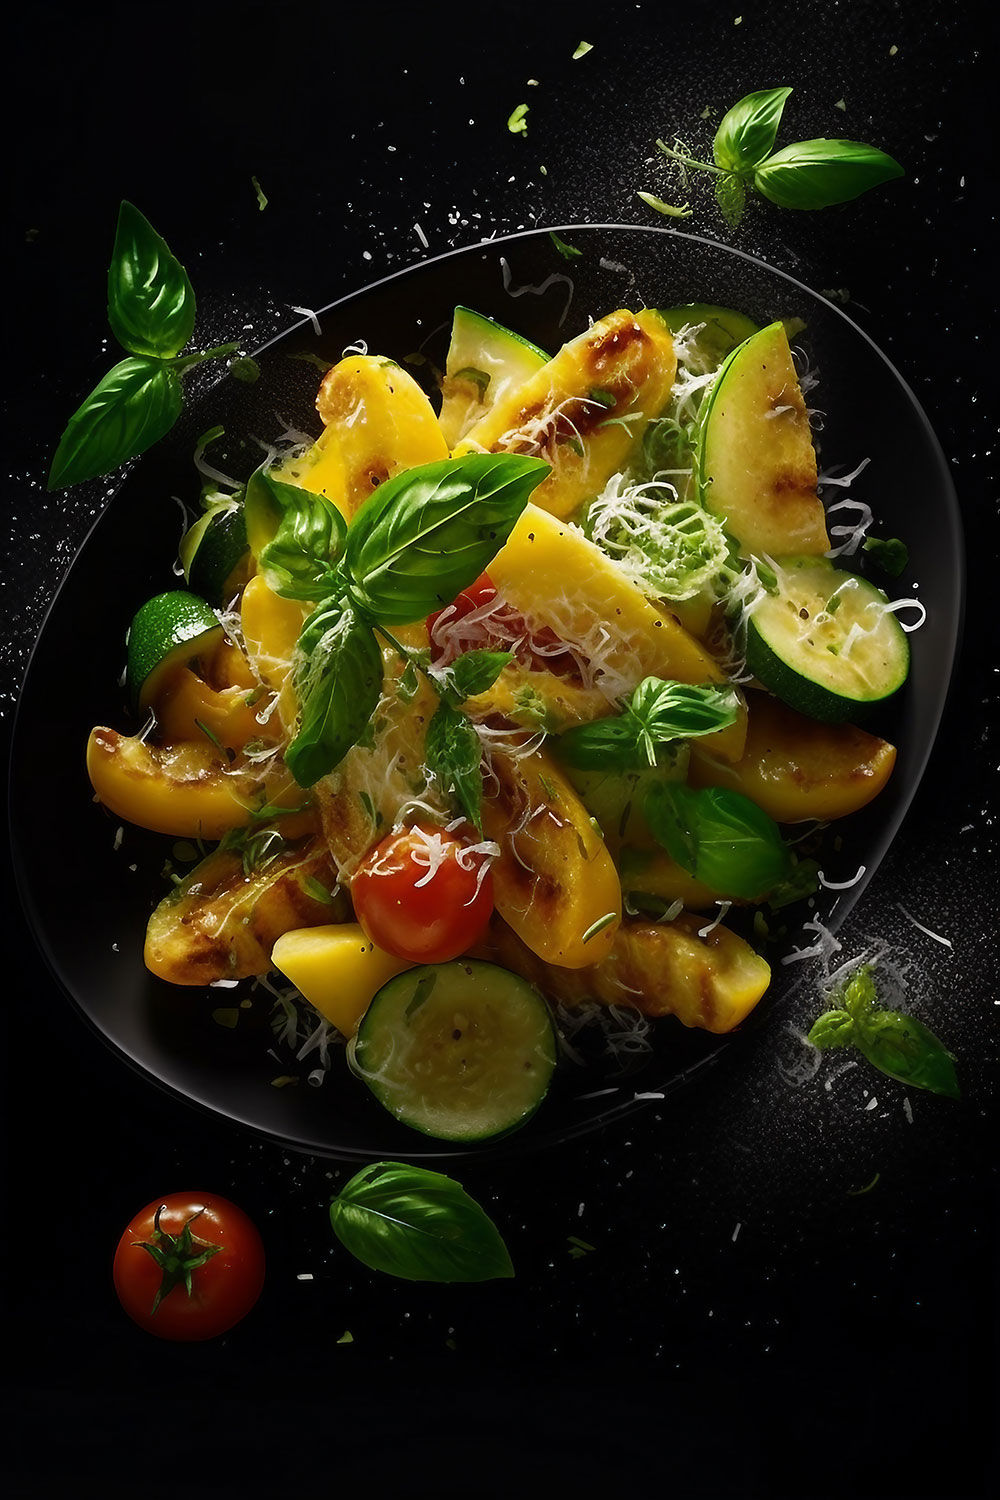 Sauteed Summer Squash with basil and garlic, oozing with aromatic flavors.